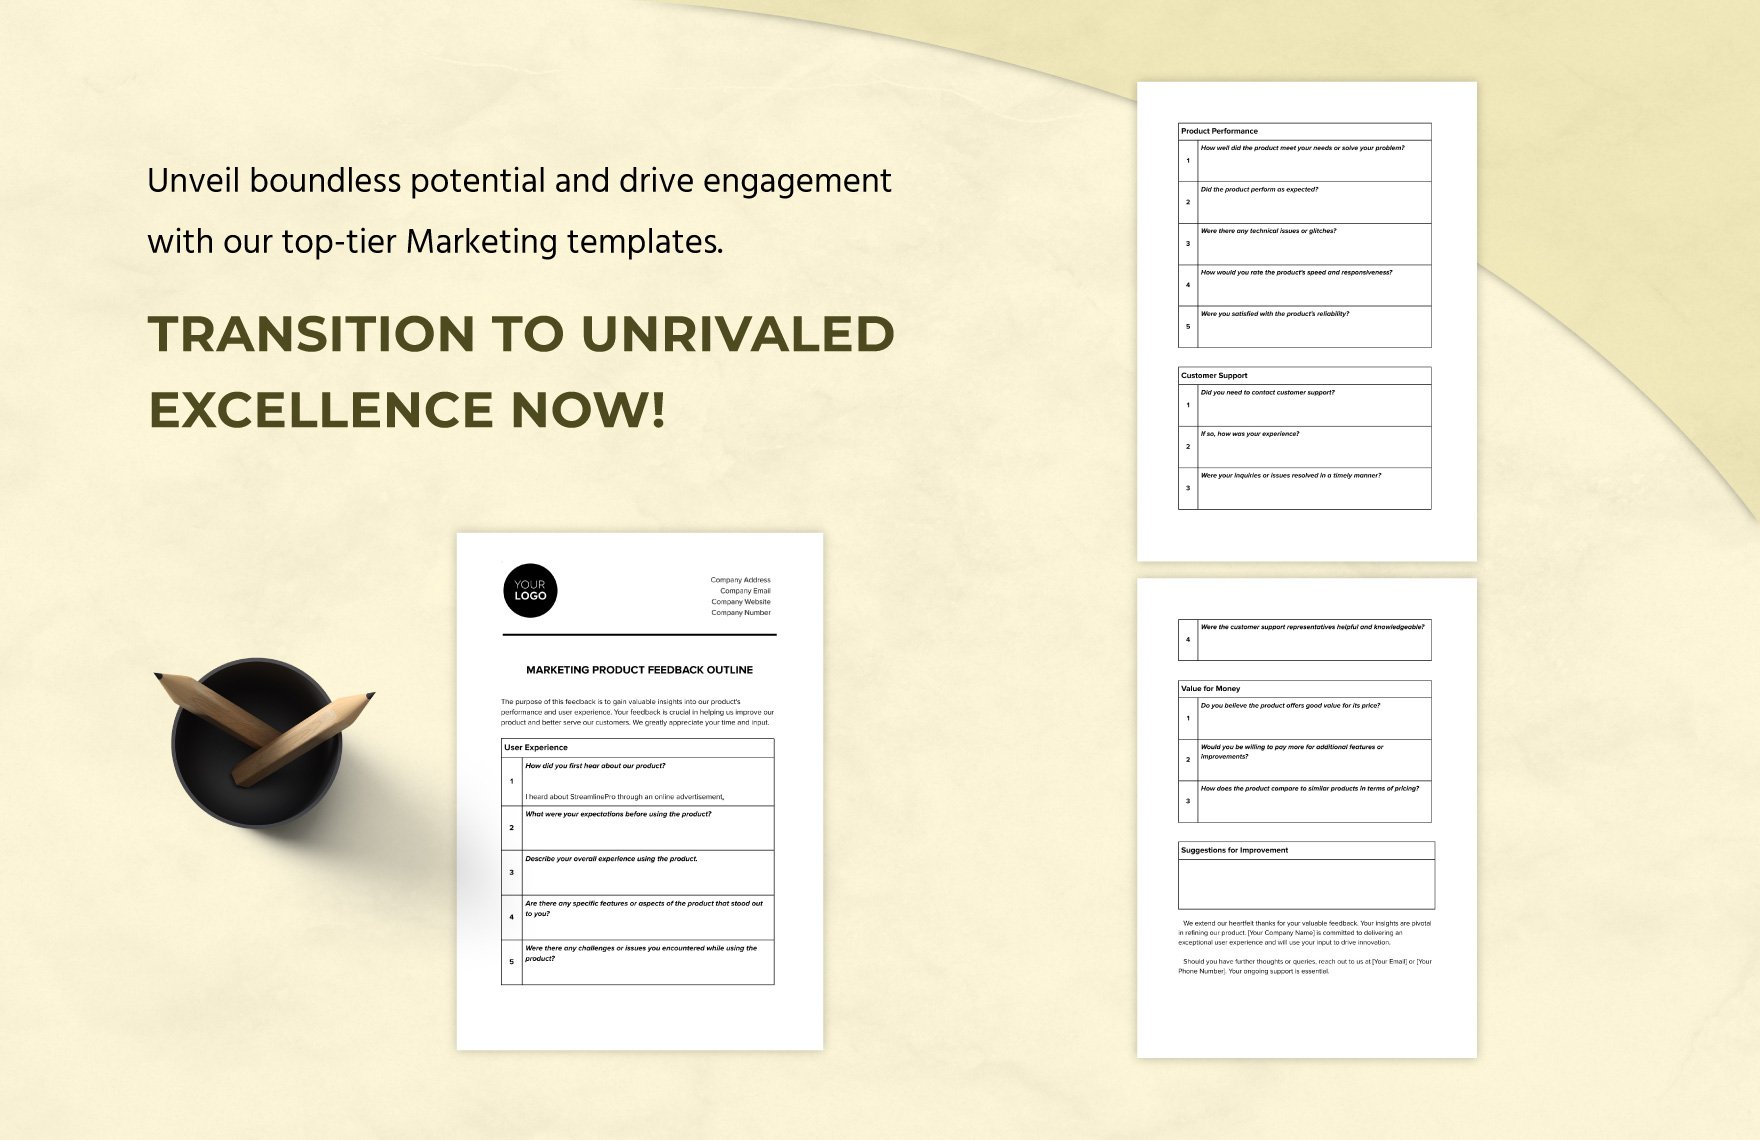 Marketing Product Feedback Outline Template